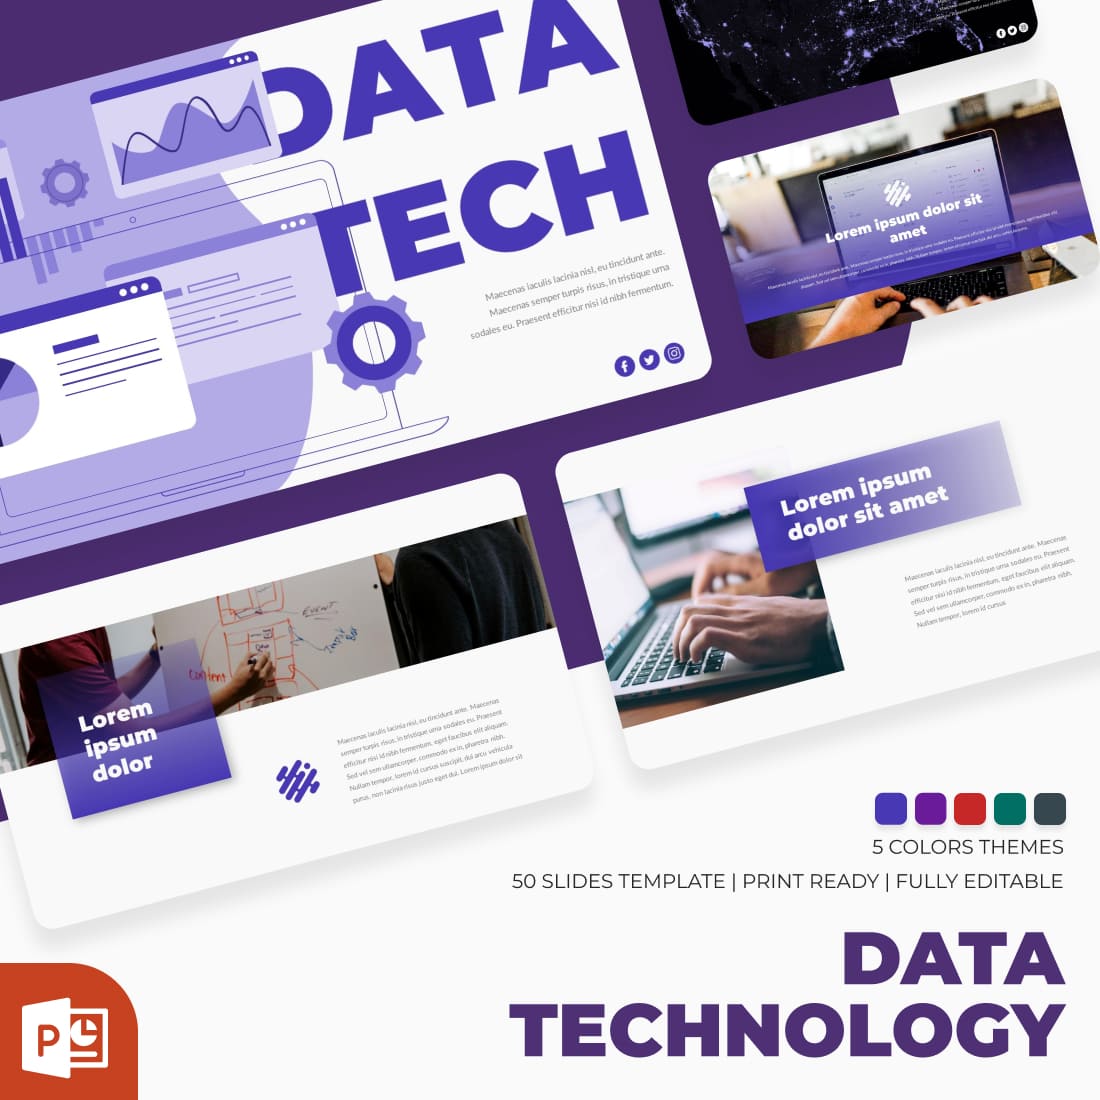 Data Technology PowerPoint Template main cover.